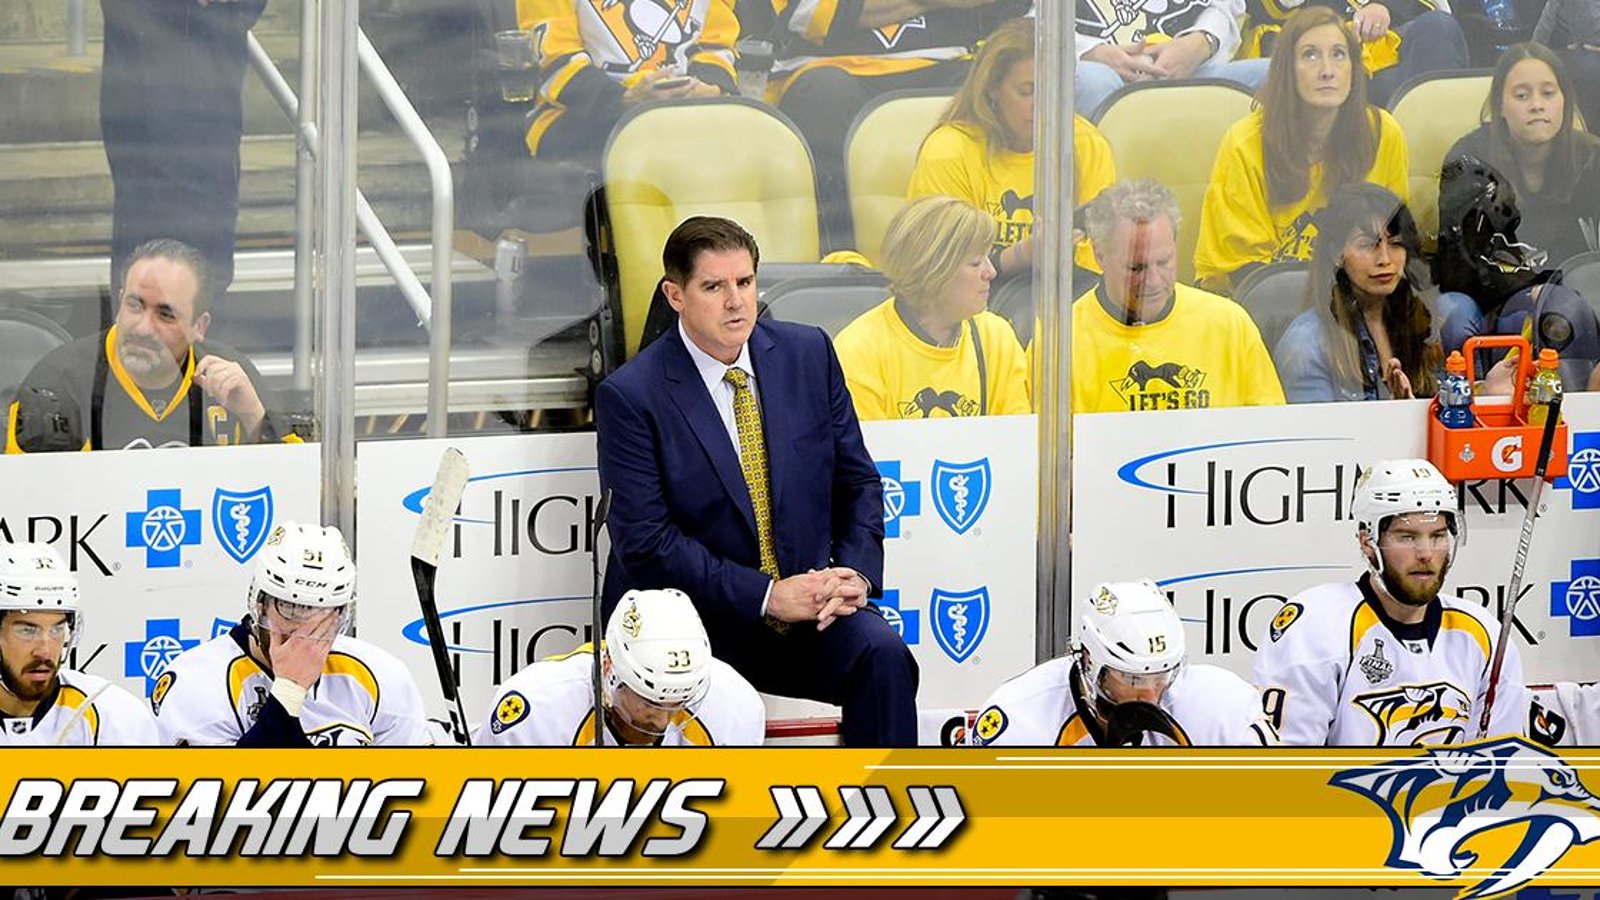 Breaking news: Predators announce two roster moves